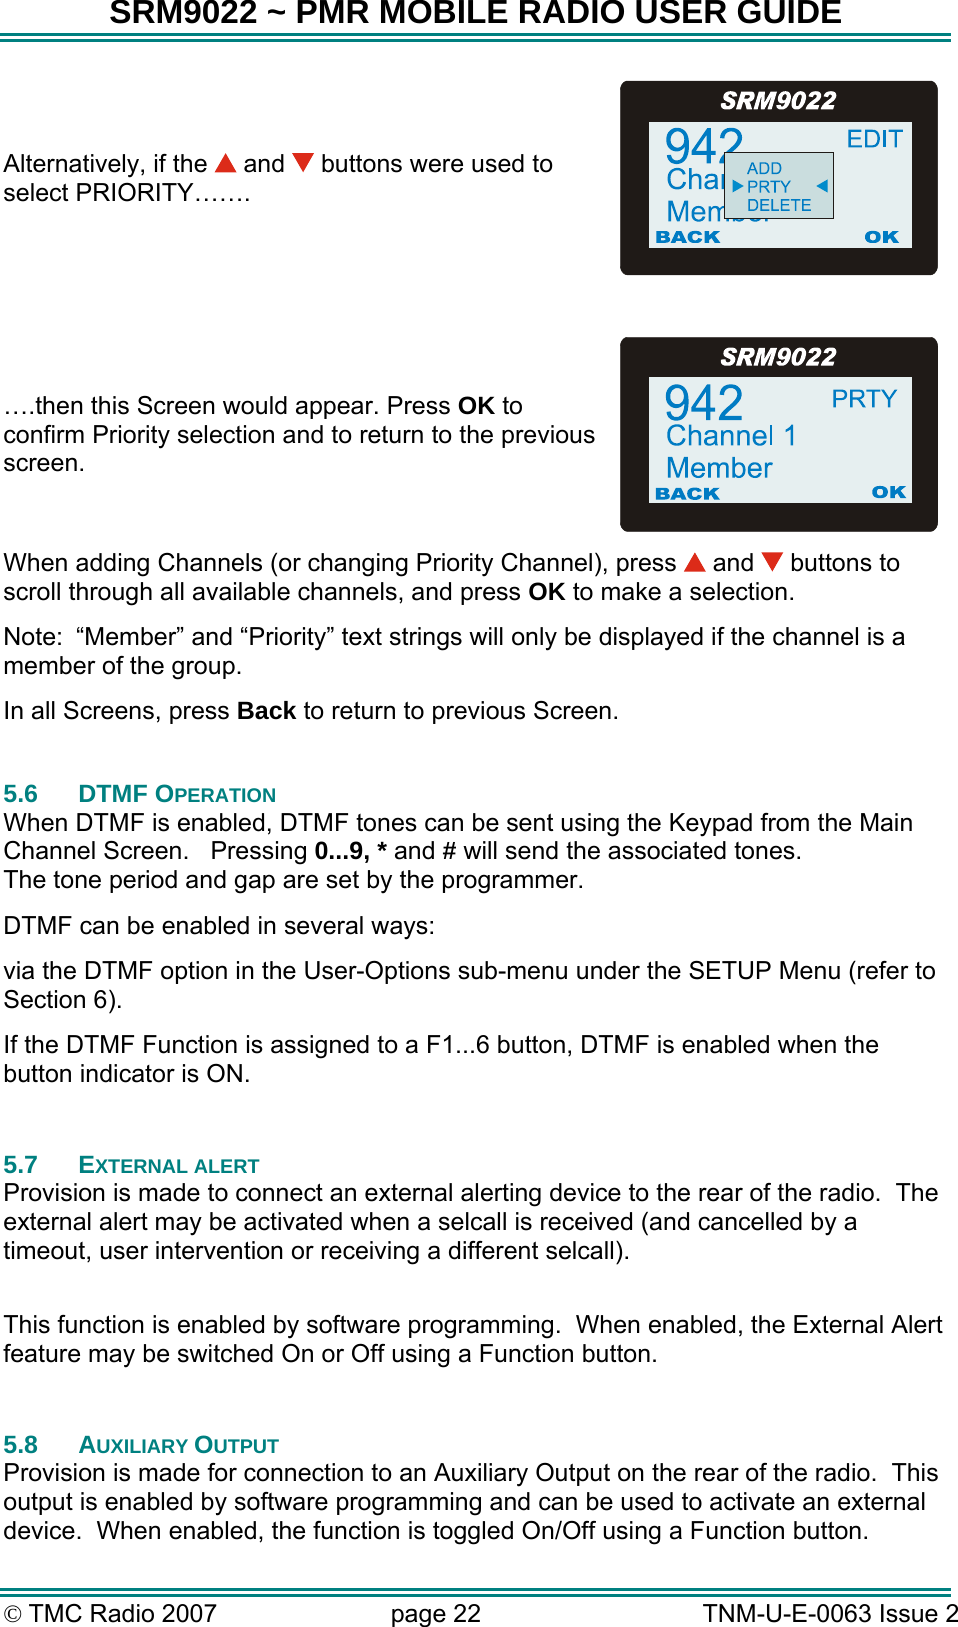 SRM9022 ~ PMR MOBILE RADIO USER GUIDE © TMC Radio 2007  page 22   TNM-U-E-0063 Issue 2 Alternatively, if the   and   buttons were used to select PRIORITY…….  ….then this Screen would appear. Press OK to confirm Priority selection and to return to the previous screen. When adding Channels (or changing Priority Channel), press   and   buttons to scroll through all available channels, and press OK to make a selection. Note:  “Member” and “Priority” text strings will only be displayed if the channel is a member of the group. In all Screens, press Back to return to previous Screen.  5.6 DTMF OPERATION When DTMF is enabled, DTMF tones can be sent using the Keypad from the Main Channel Screen.   Pressing 0...9, * and # will send the associated tones. The tone period and gap are set by the programmer. DTMF can be enabled in several ways: via the DTMF option in the User-Options sub-menu under the SETUP Menu (refer to Section 6). If the DTMF Function is assigned to a F1...6 button, DTMF is enabled when the button indicator is ON.  5.7 EXTERNAL ALERT Provision is made to connect an external alerting device to the rear of the radio.  The external alert may be activated when a selcall is received (and cancelled by a timeout, user intervention or receiving a different selcall).  This function is enabled by software programming.  When enabled, the External Alert feature may be switched On or Off using a Function button.  5.8 AUXILIARY OUTPUT Provision is made for connection to an Auxiliary Output on the rear of the radio.  This output is enabled by software programming and can be used to activate an external device.  When enabled, the function is toggled On/Off using a Function button. 